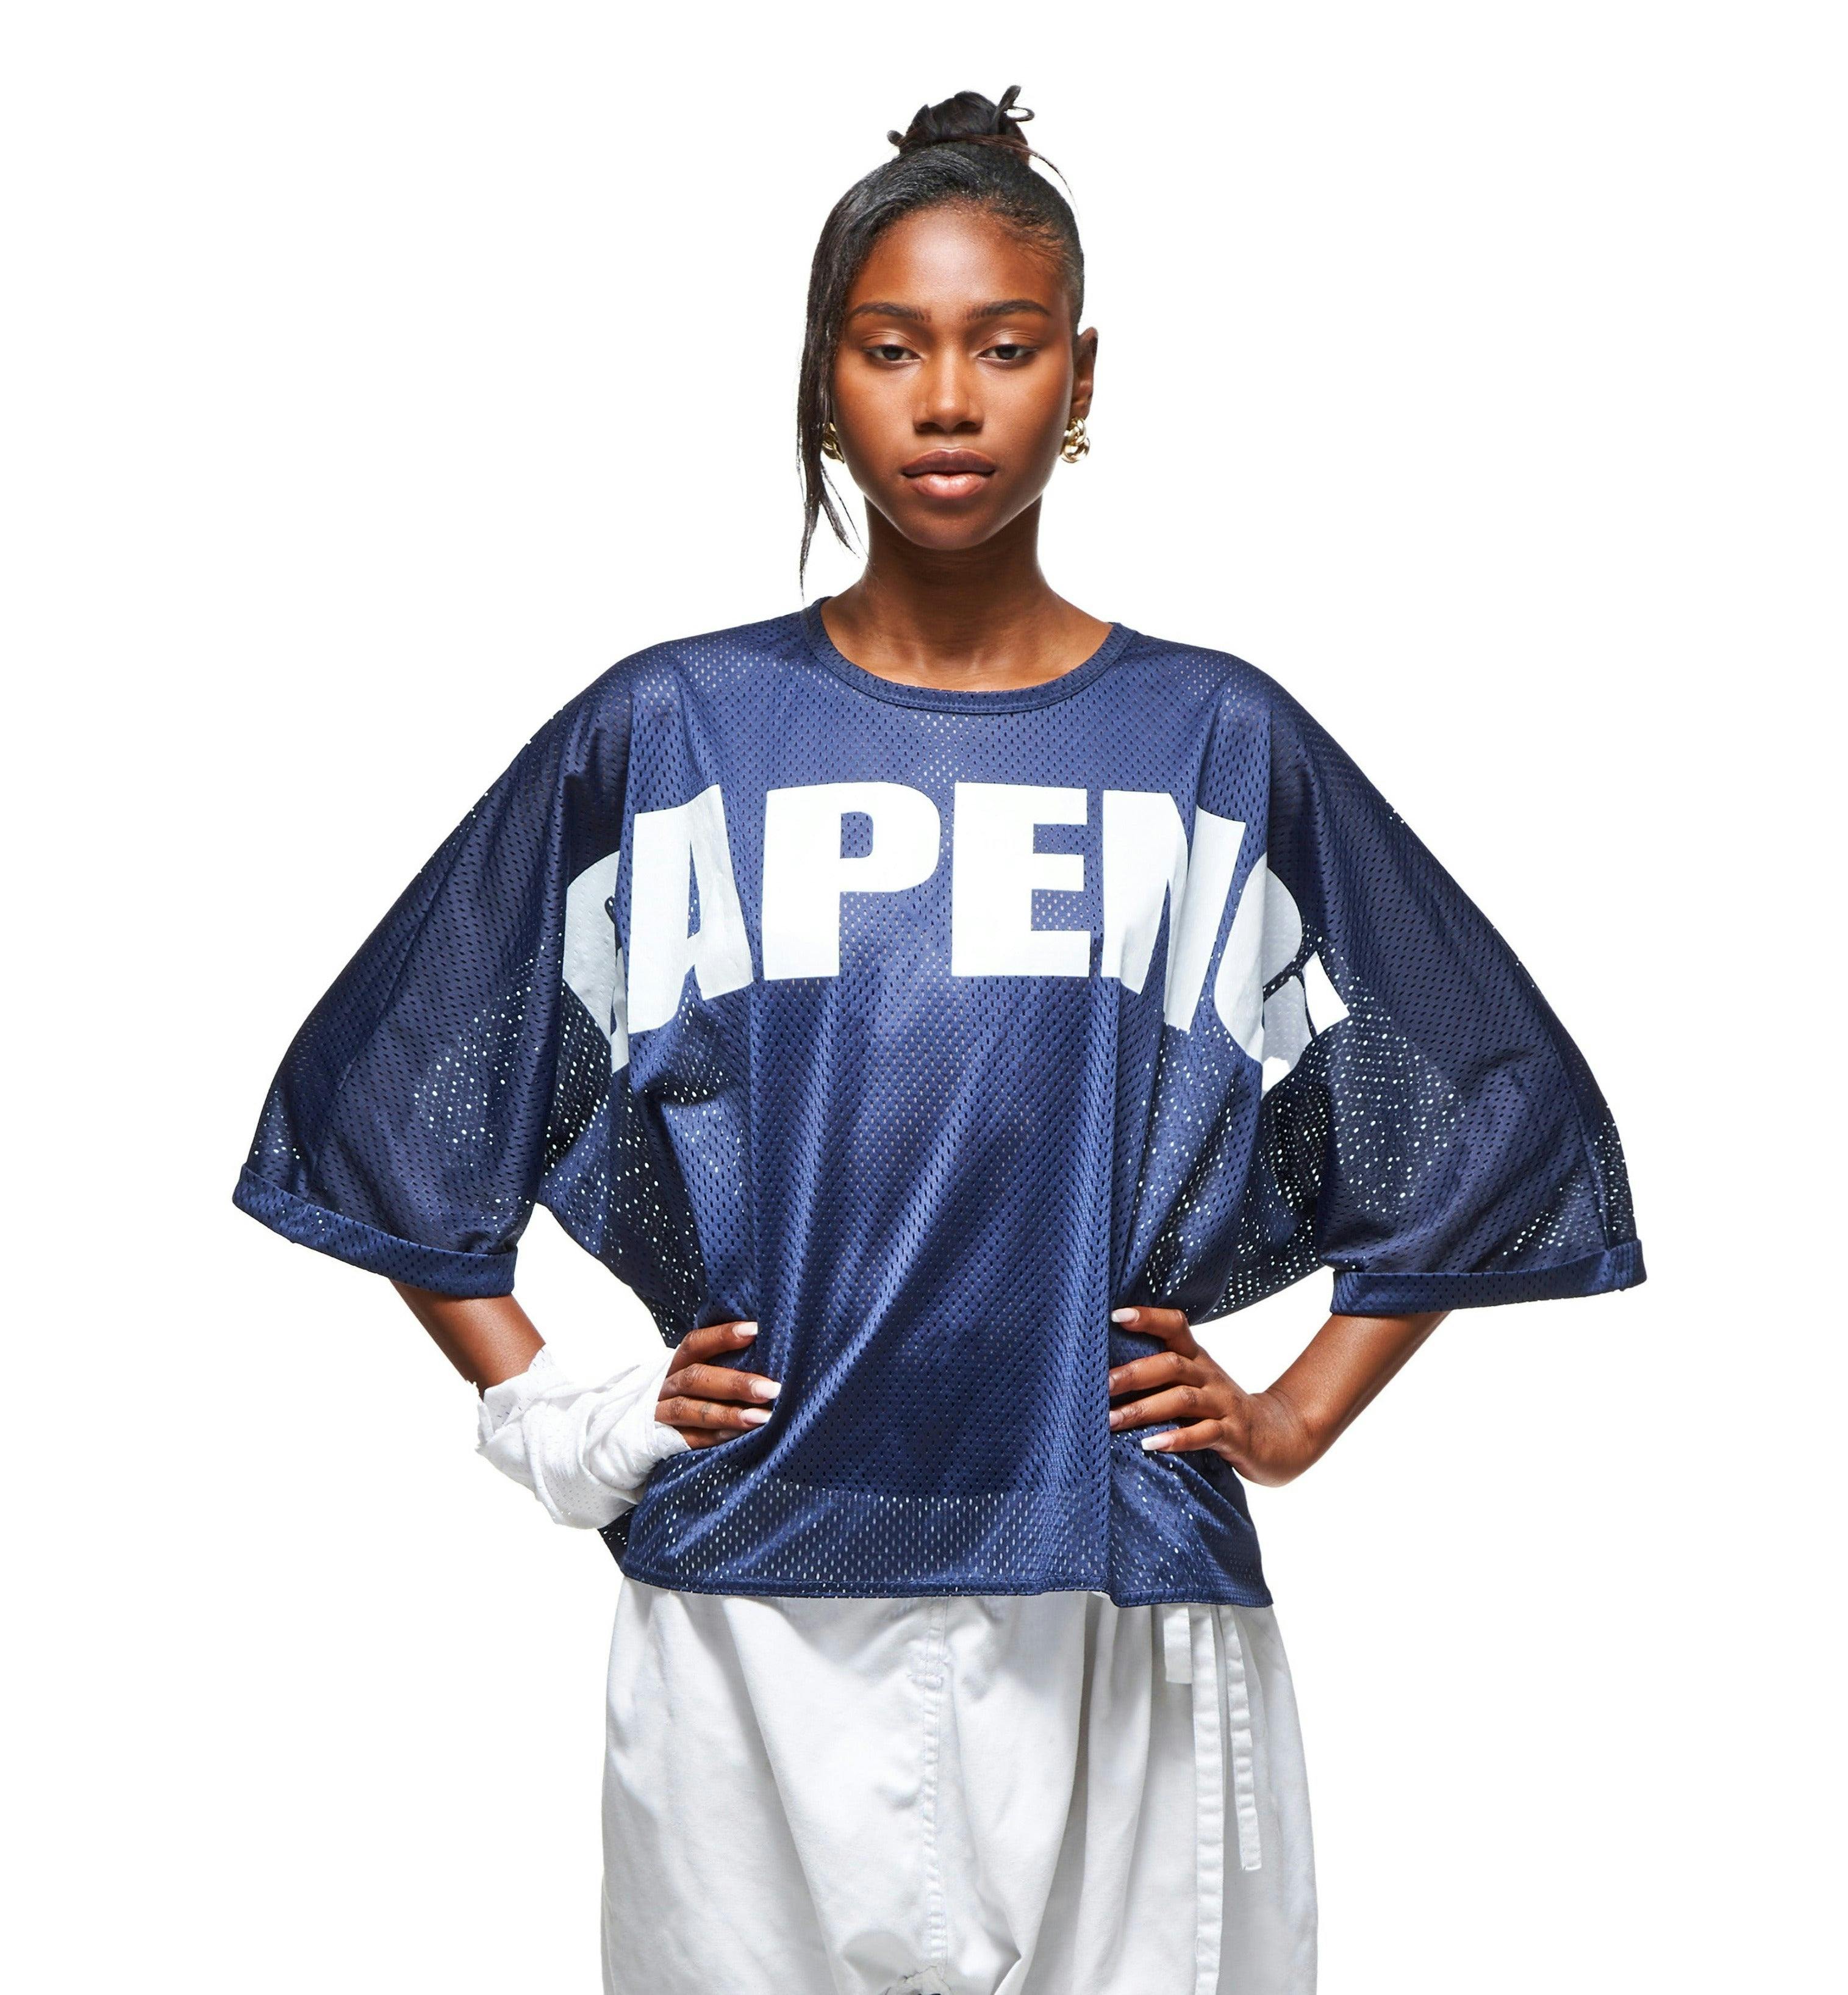 CAPENCi Full Length Jersey